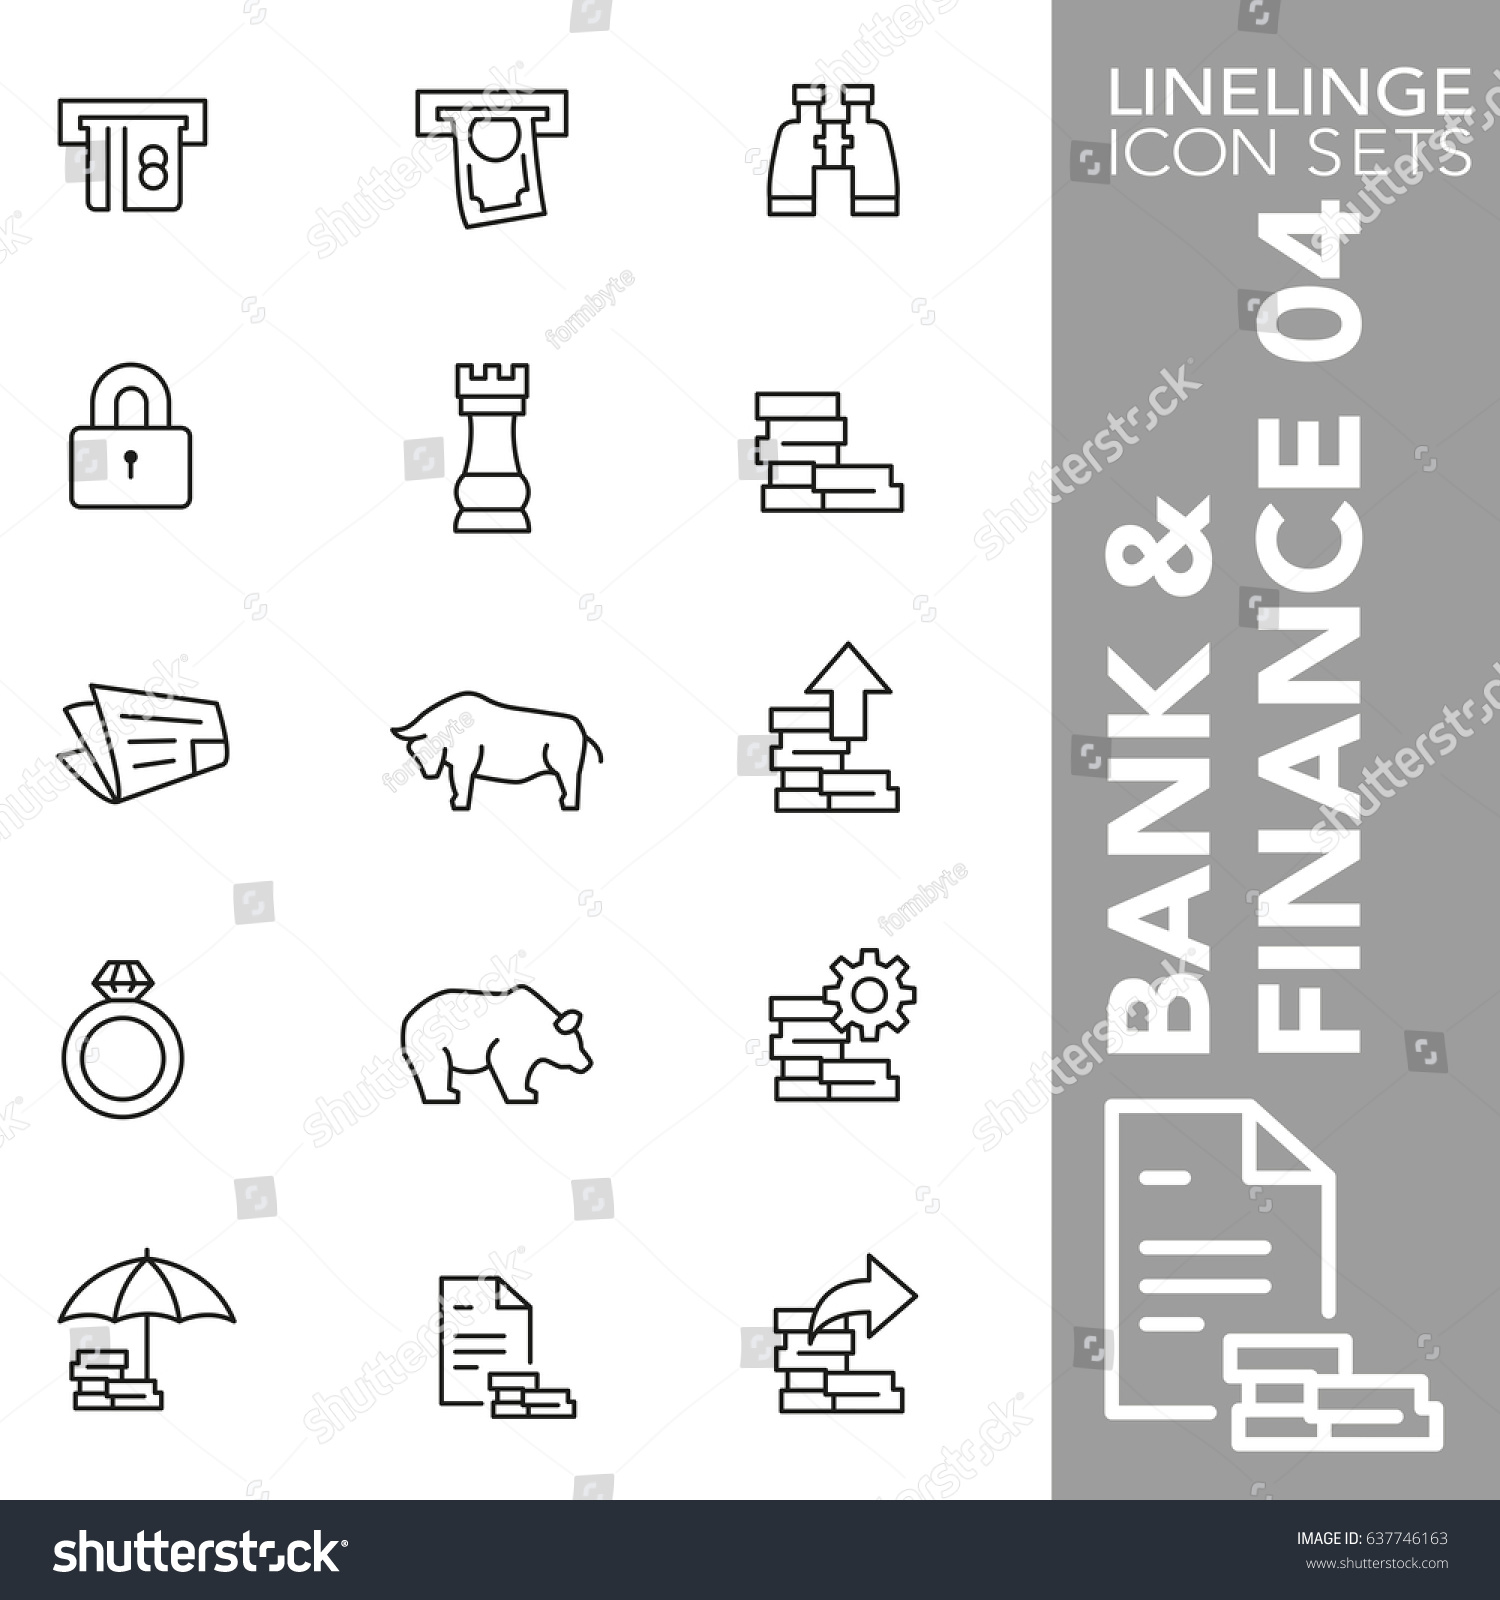 SVG of High quality thin line icons of banking, finance and economic. Linelinge are the best pictogram pack unique linear design for all dimensions and devices. Stroke vector logo symbol and website content. svg